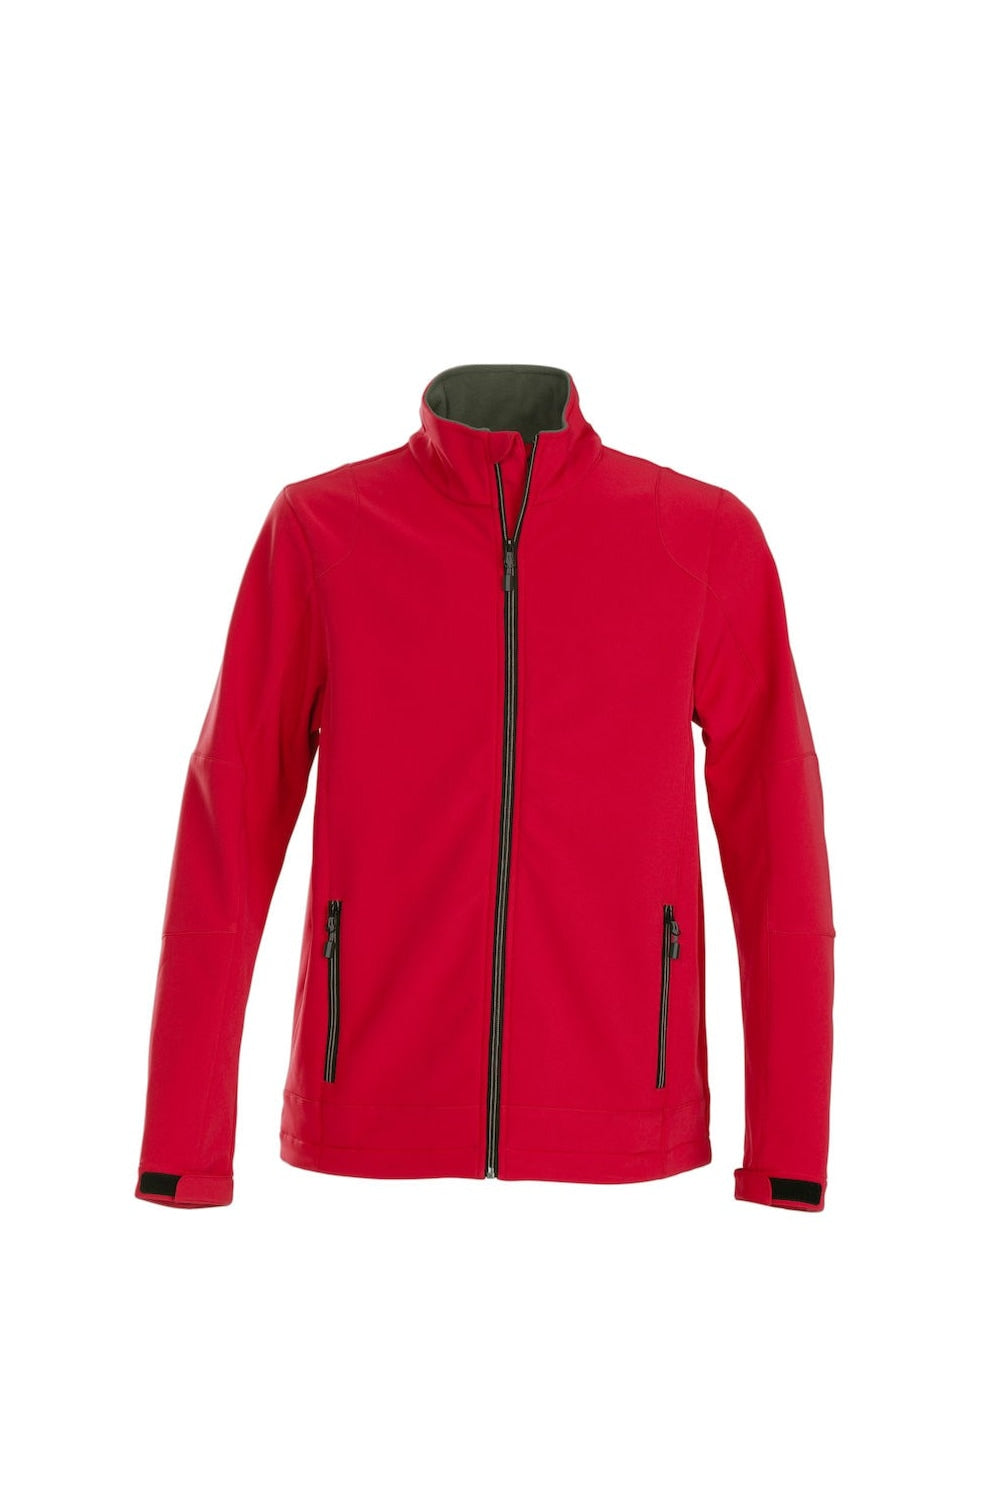 Mens Trial Soft Shell Jacket - Red